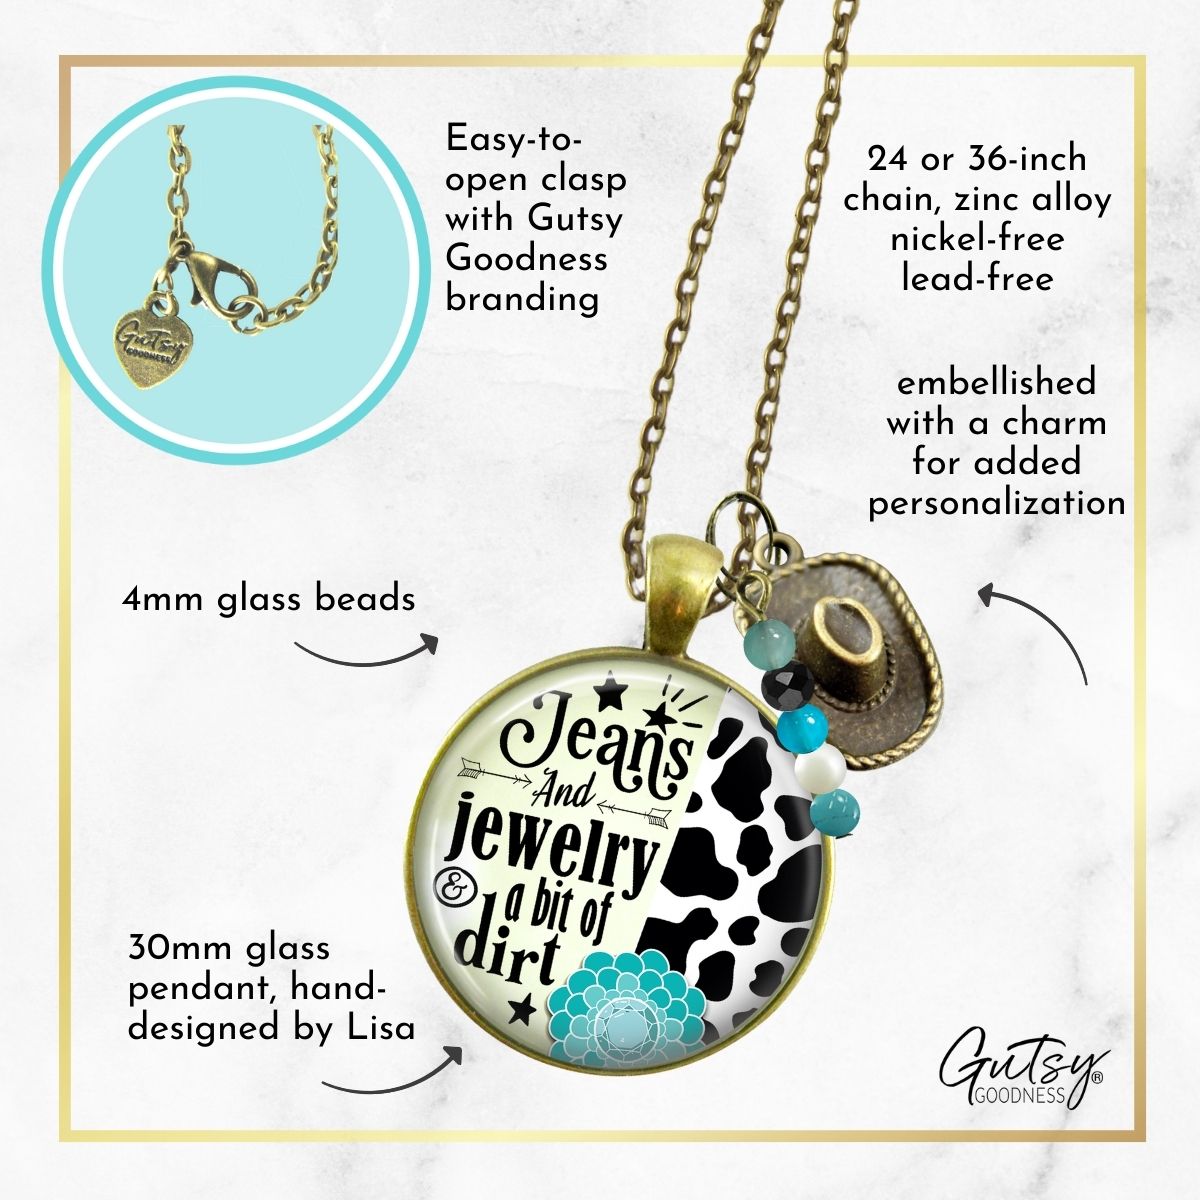 Handmade Gutsy Goodness Jewelry Jeans And Jewelry And A Bit Of Dirt Necklace Western Cowboy Hat Country Girl Pendant & Message Card